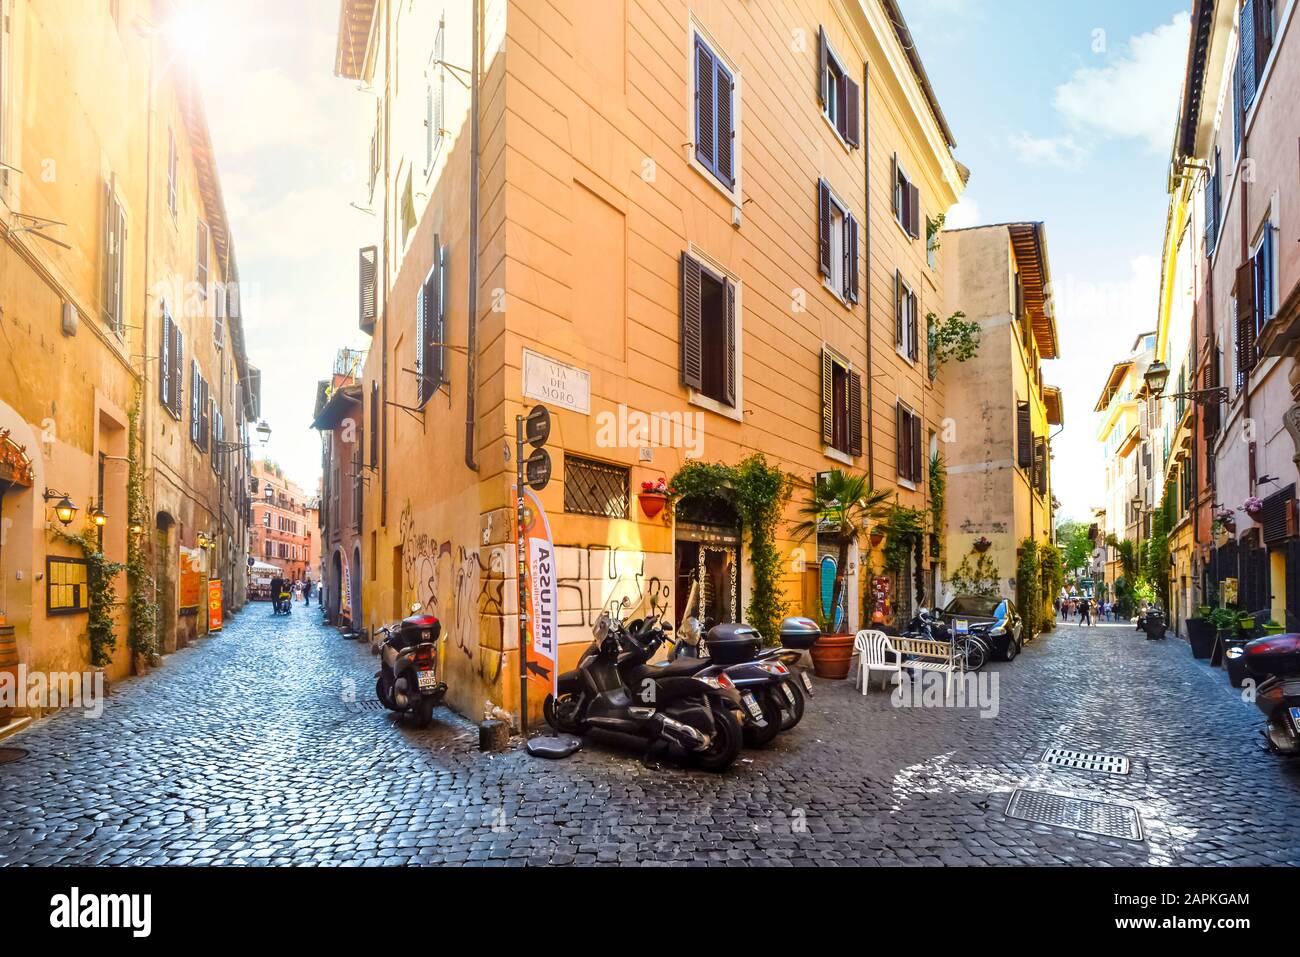 Picturesque, colorful cobblestone street with motorcycles parked and shops in the Trastevere district of Rome Italy. Stock Photo